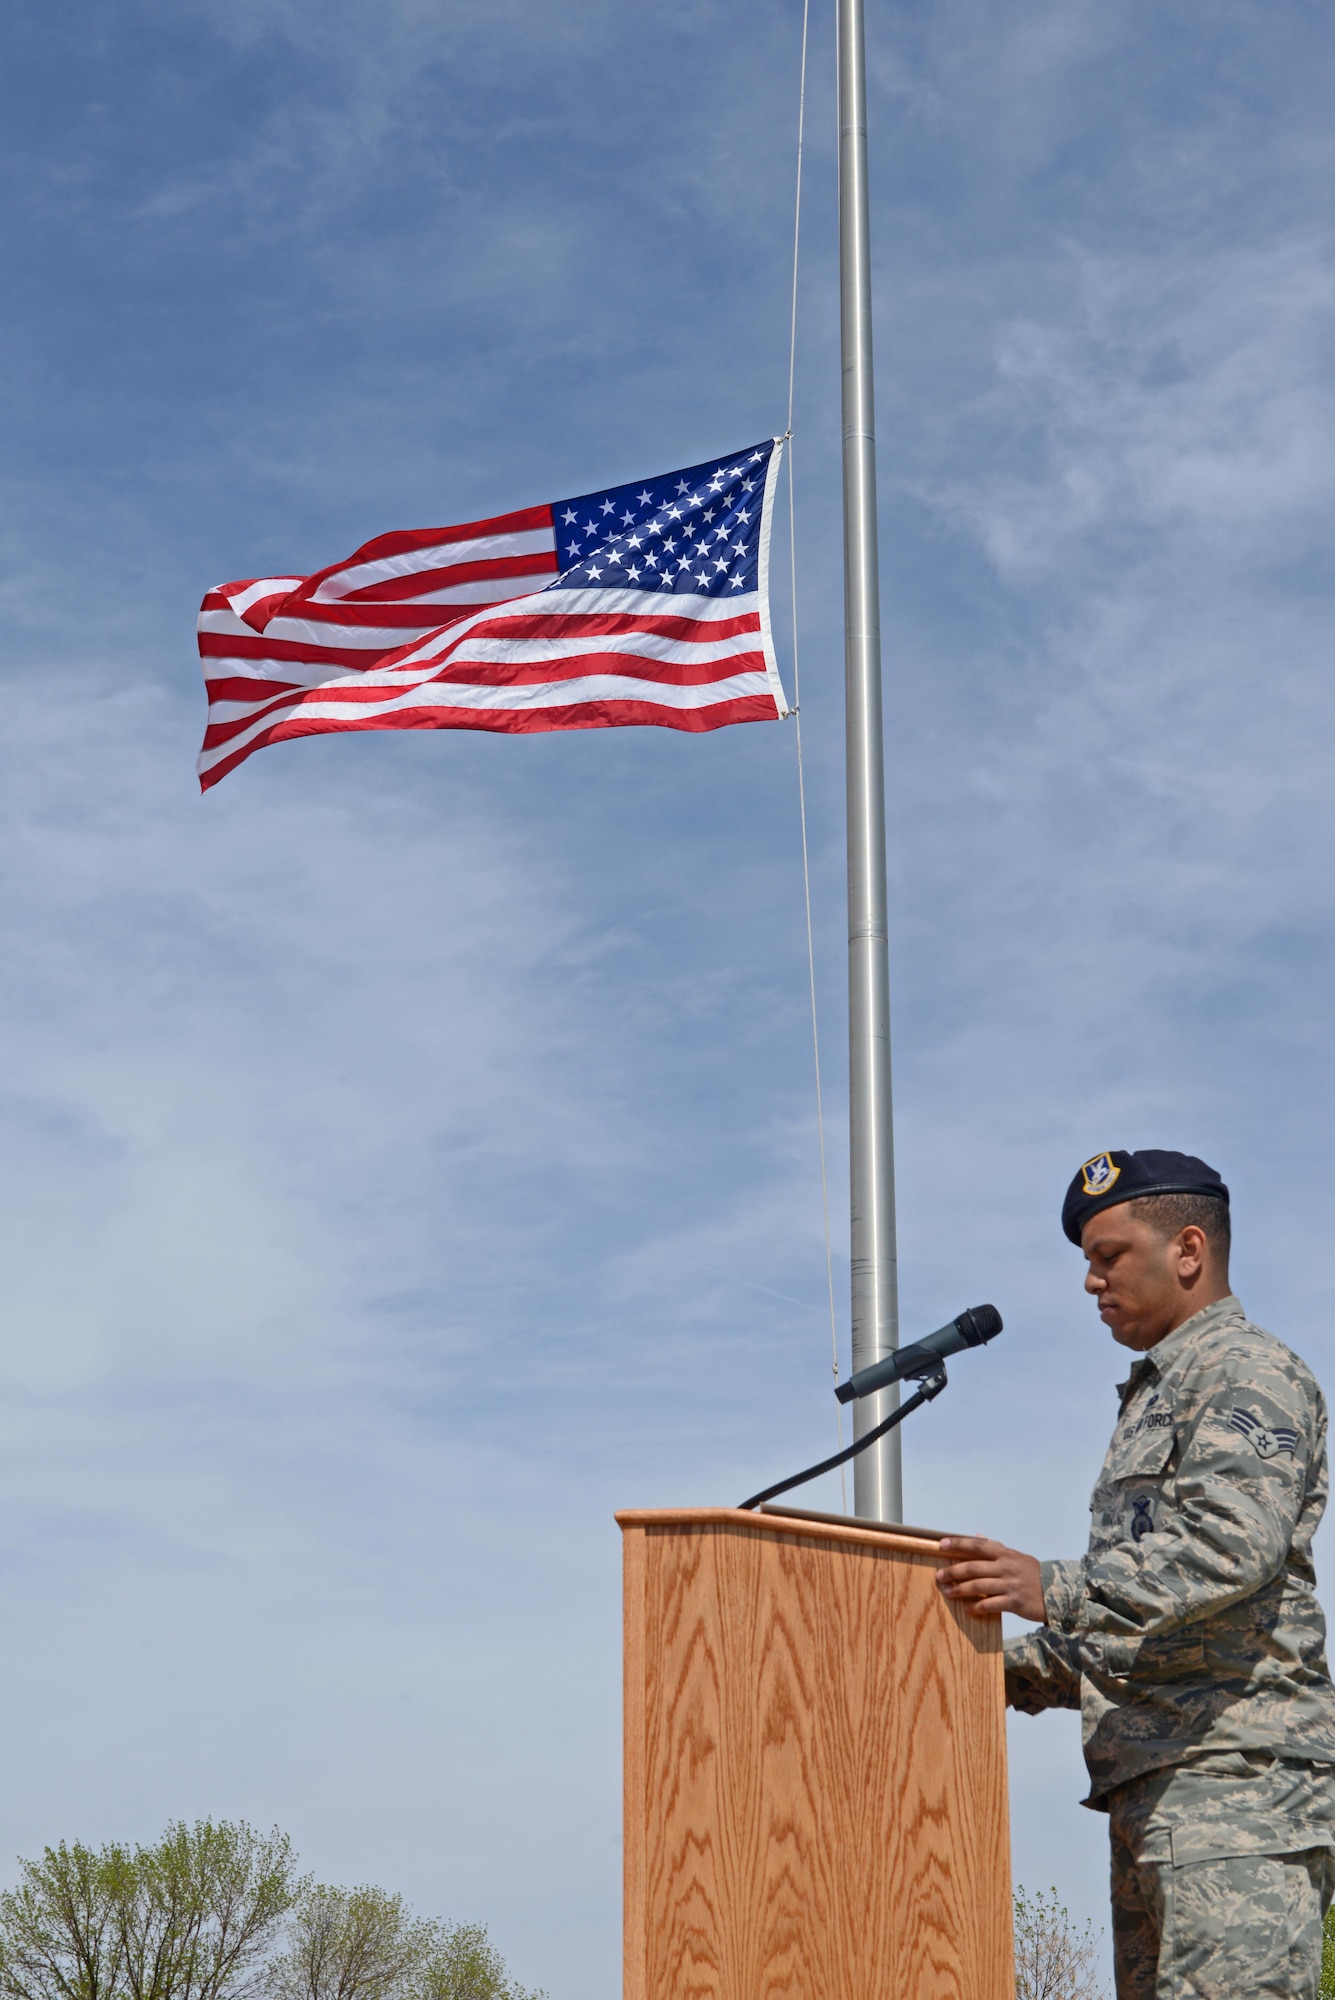 Senior Airman Eduardo Virgil, 5th Security Forces Squadron desk sergeant, recites fallen officers’ names during a National Police Week retreat ceremony at Minot Air Force Base, N.D., May 19, 2017. A retreat ceremony is the daily military practice of lowering the flag. (U.S. Air Force photo/Airman 1st Class Austin M. Thomas)